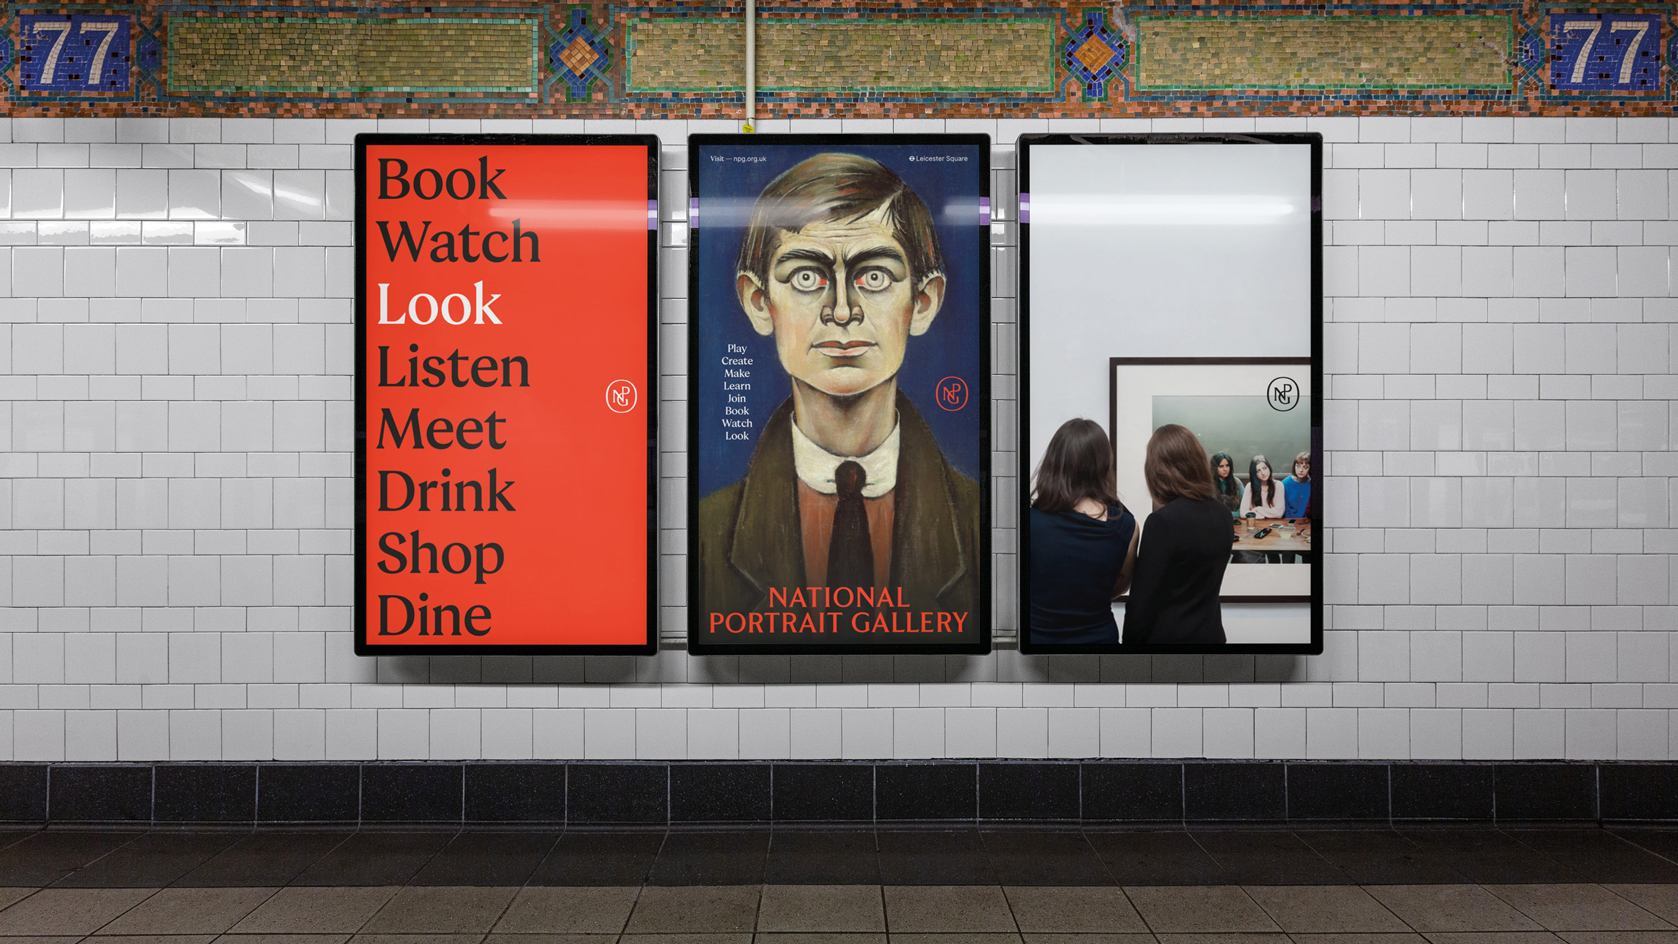 Advertising posters on tiled wall showing National Portrait Gallery new branding and logo